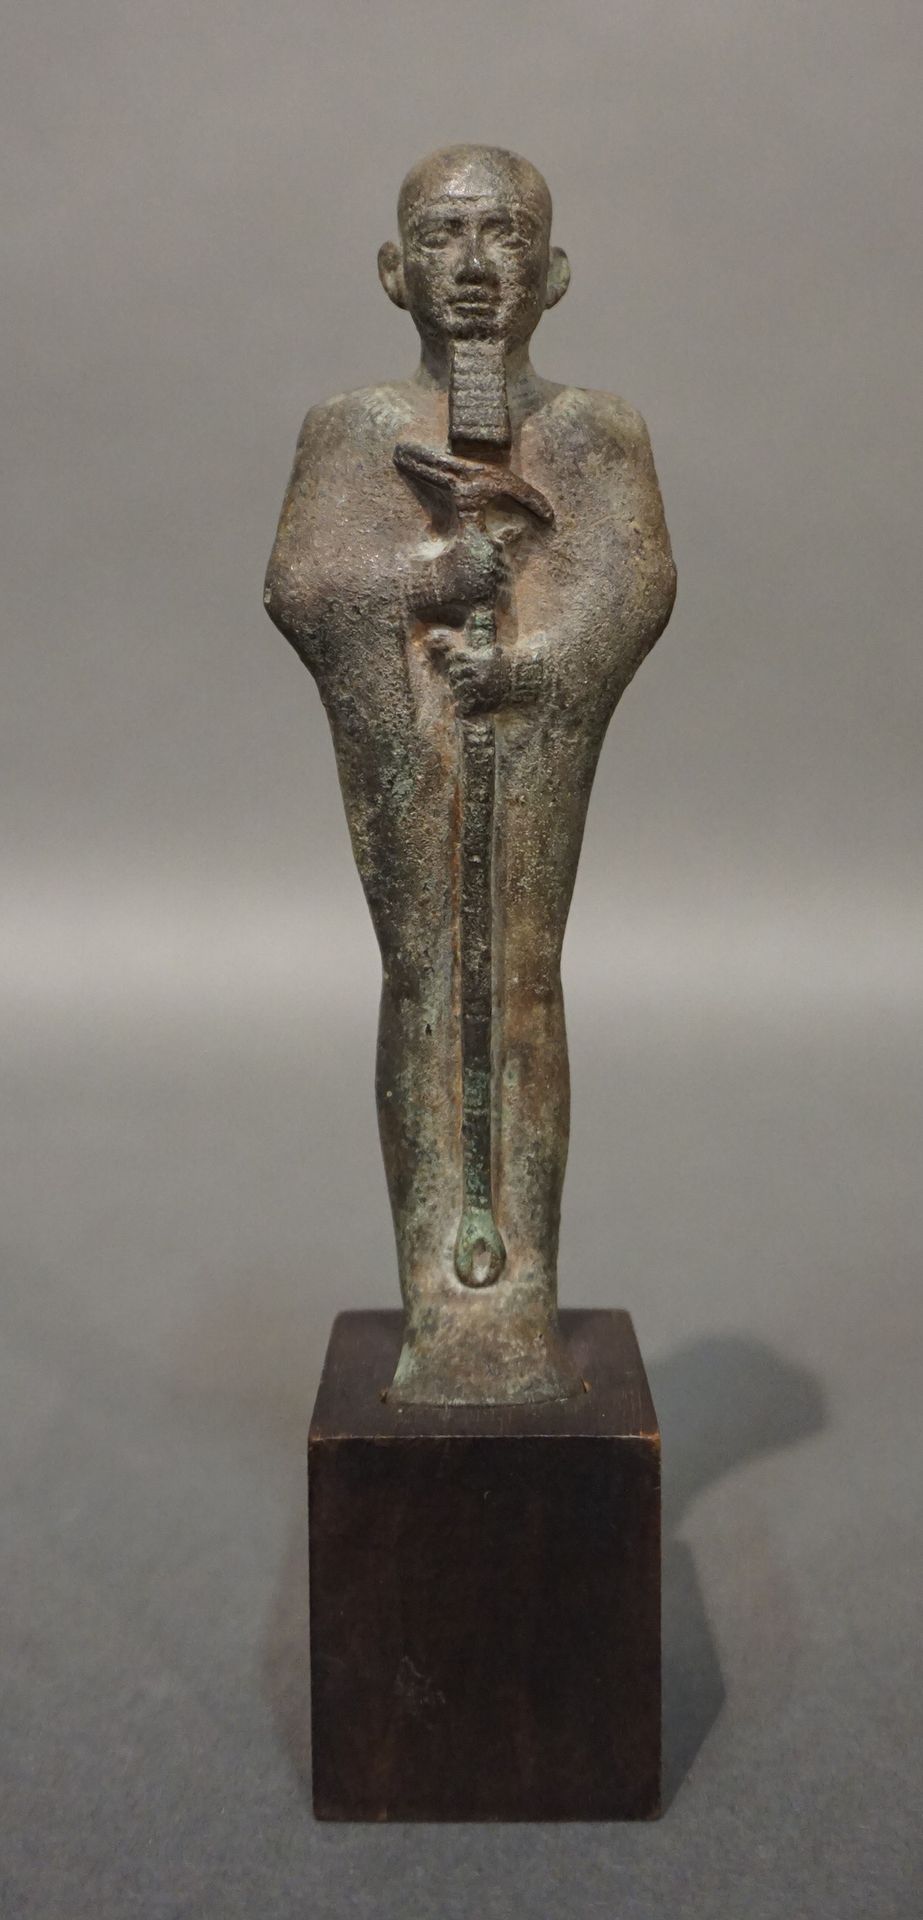 Null Statuette representing the god Ptah holding a scepter Ouas. He wears a larg&hellip;